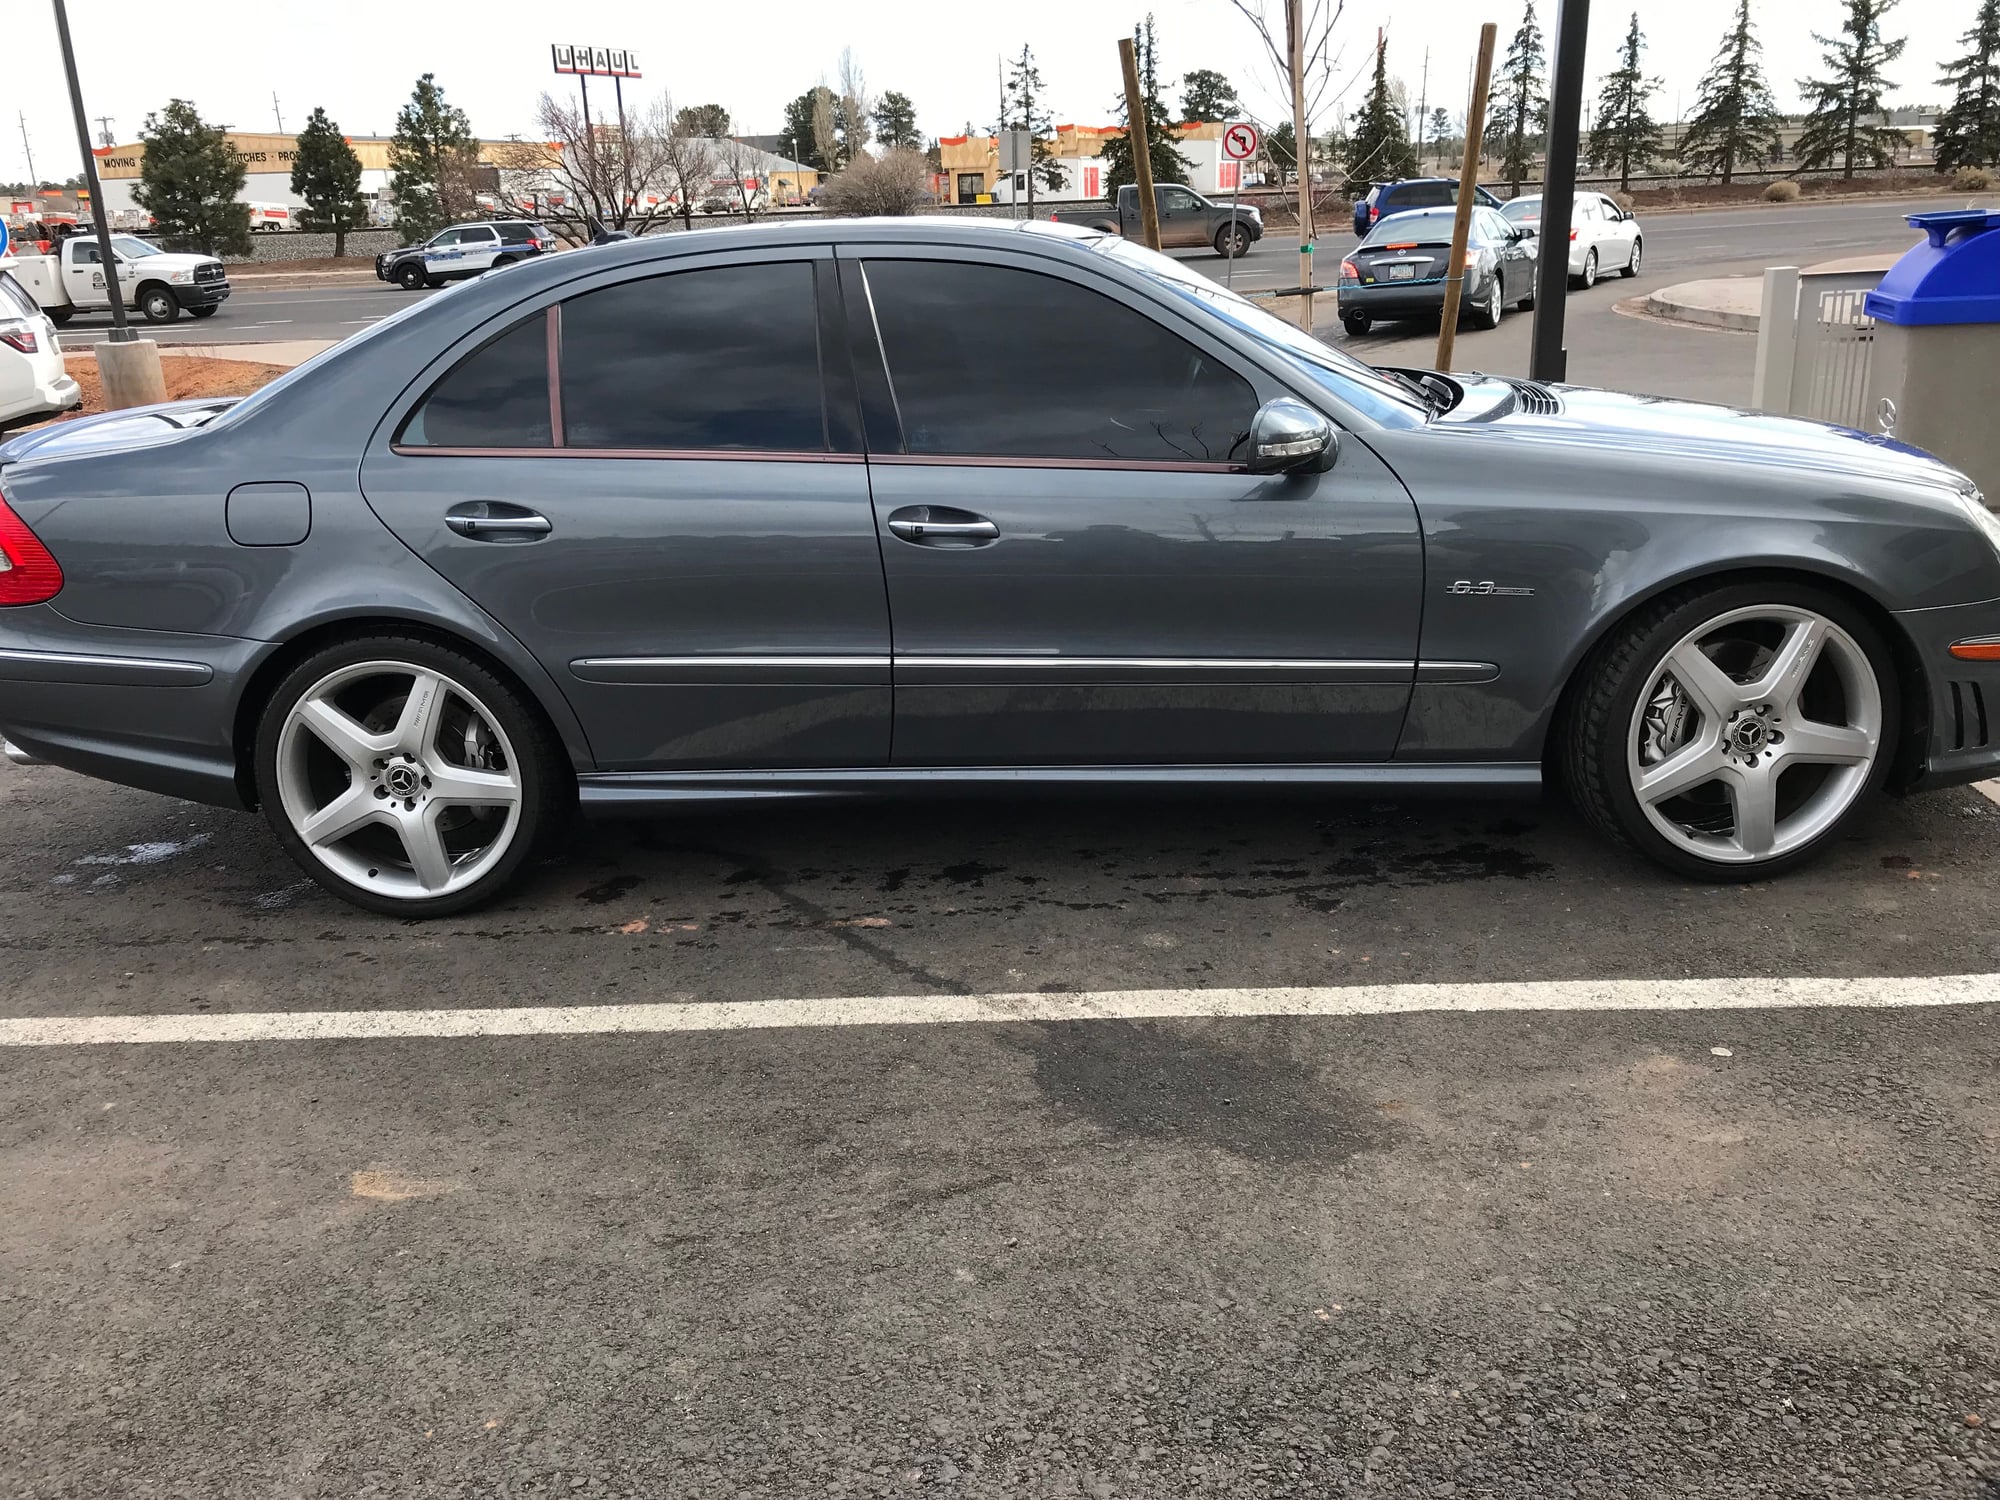 Wheels and Tires/Axles - 20" AMG OEM wheels - Used - 2007 to 2011 Mercedes-Benz E63 AMG - Williams, AZ 86046, United States